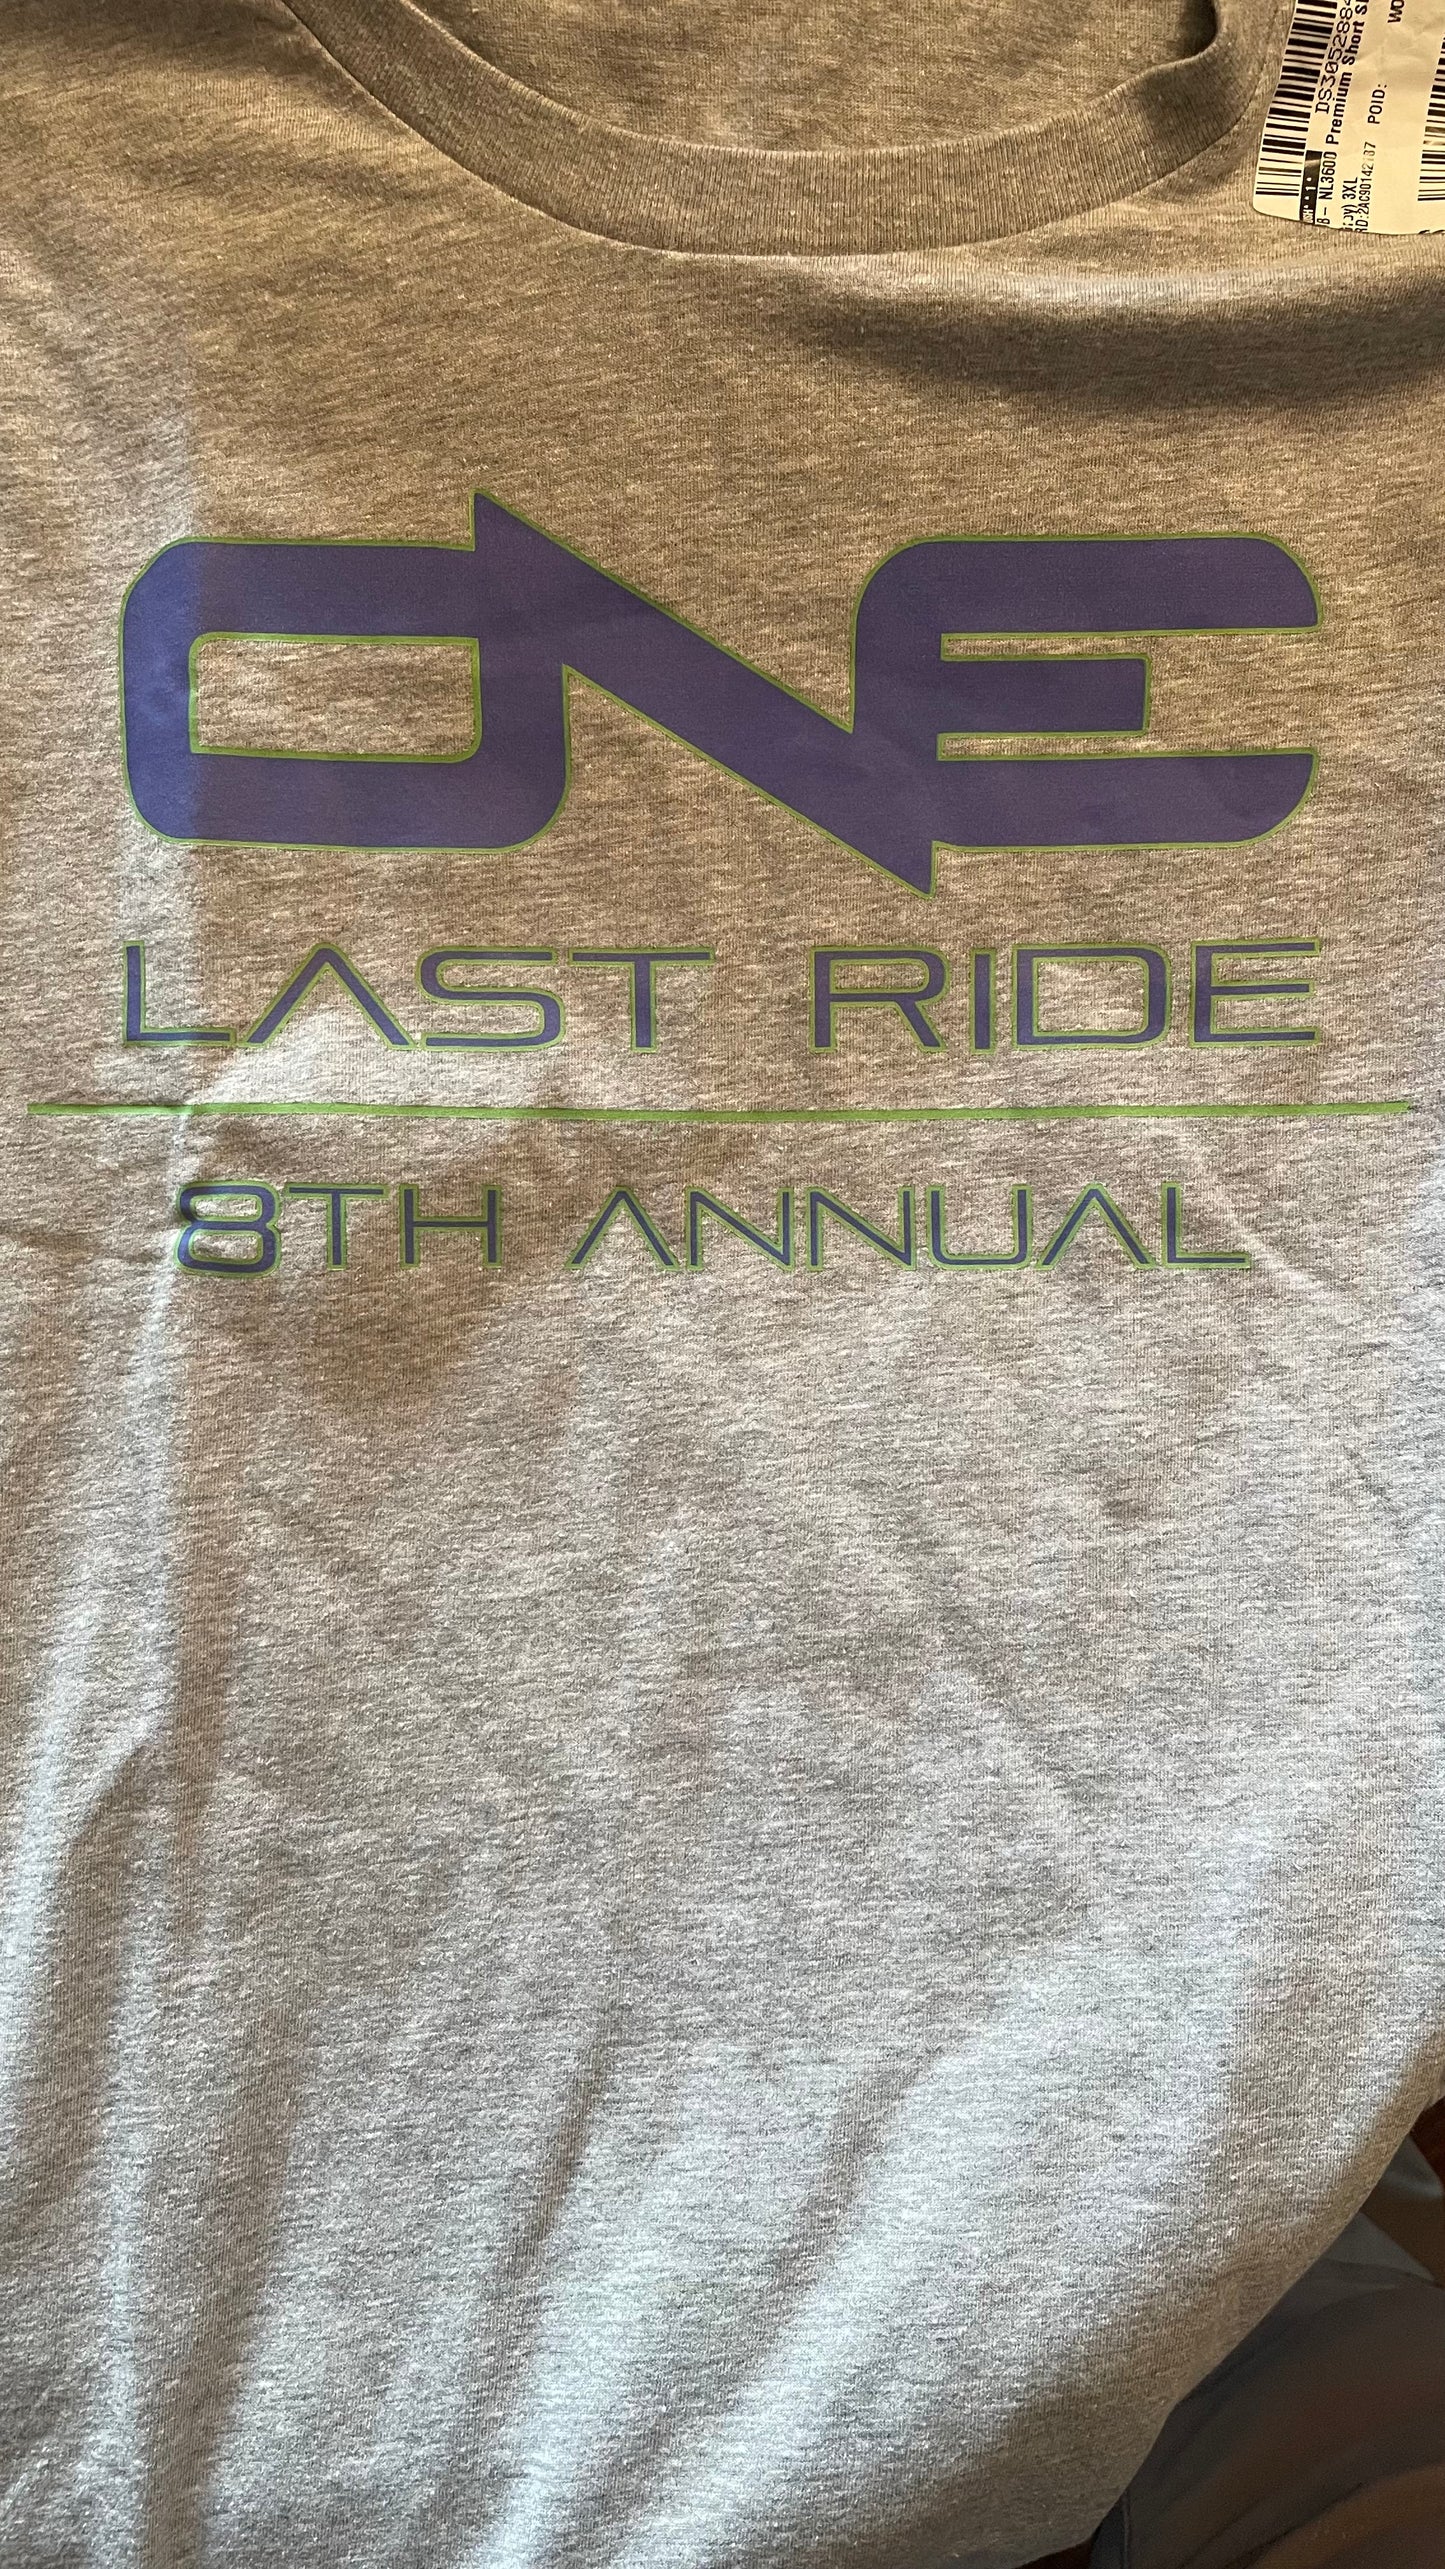 One Last Ride Youth Cotton T-Shirt